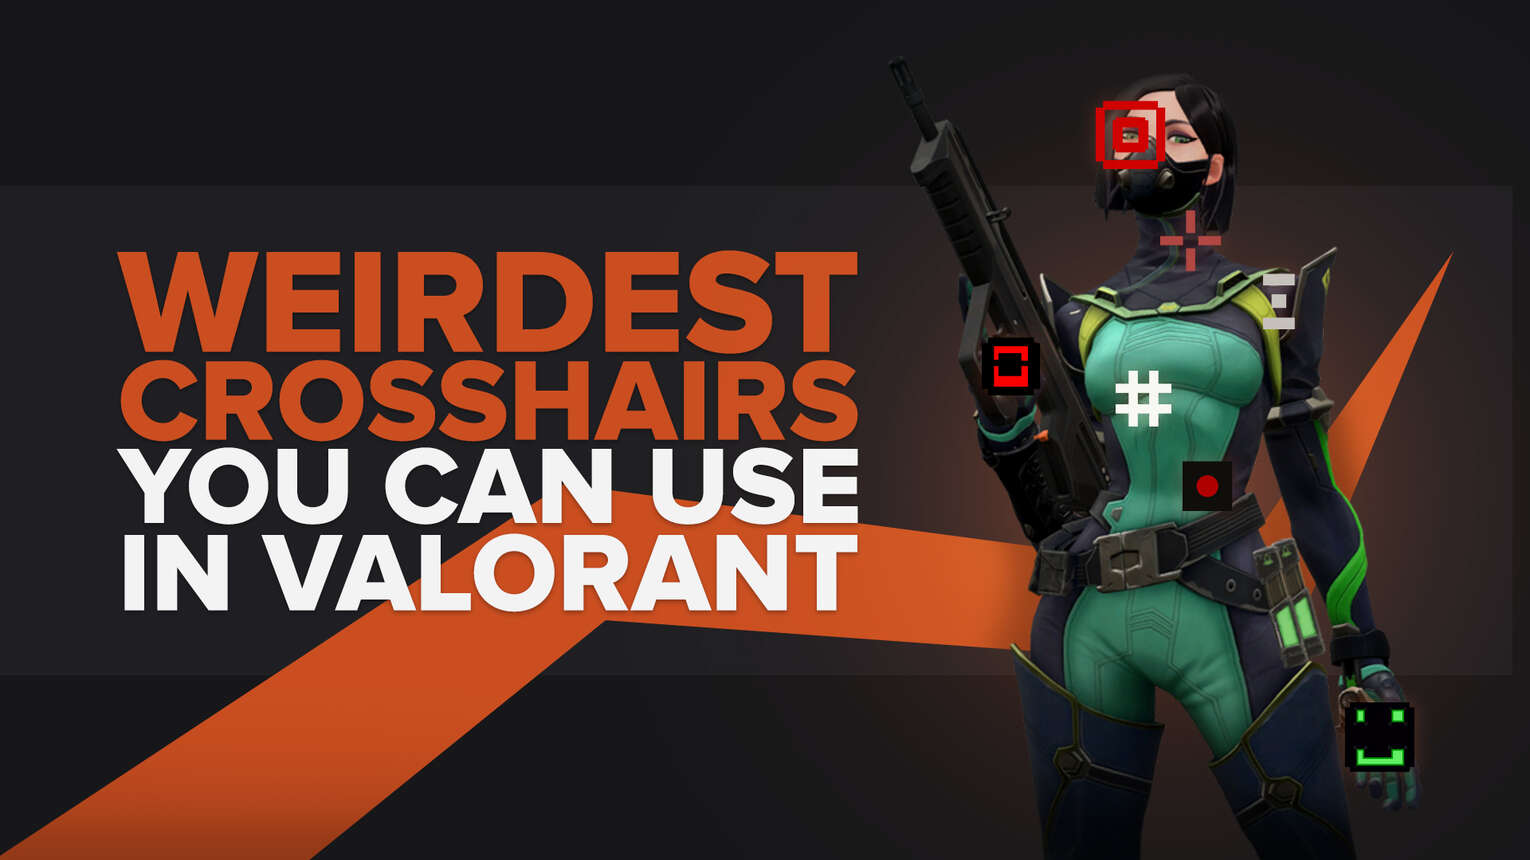 The Weirdest Crosshairs You Can Use in Valorant